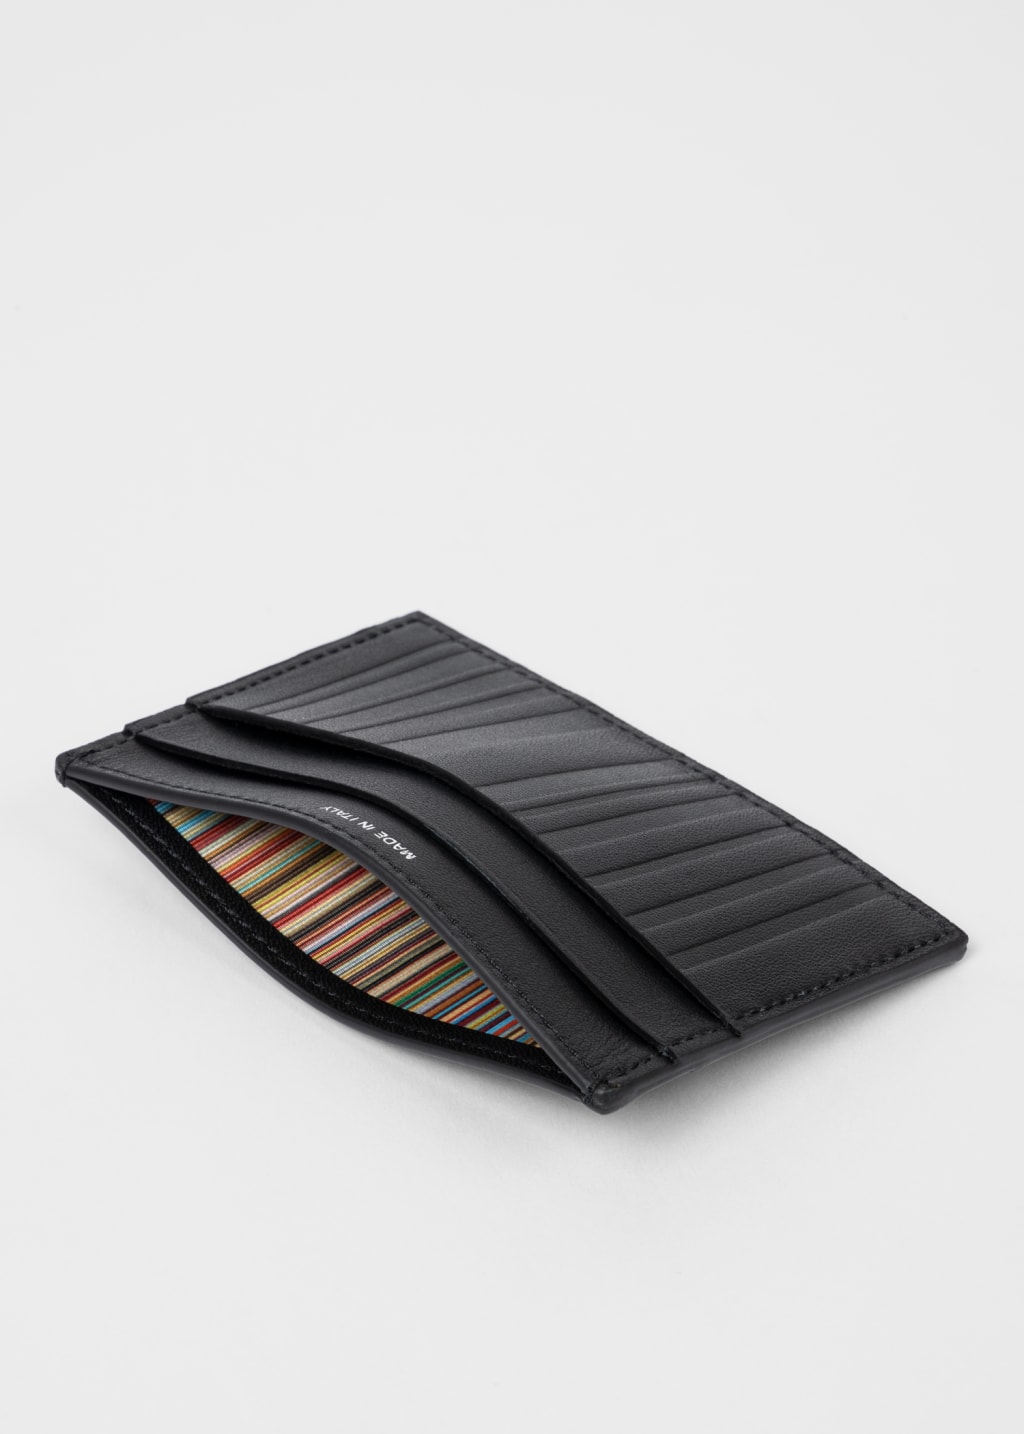 Product View - 'Shadow Stripe' Socks & Card Holder Gift Set by Paul Smith